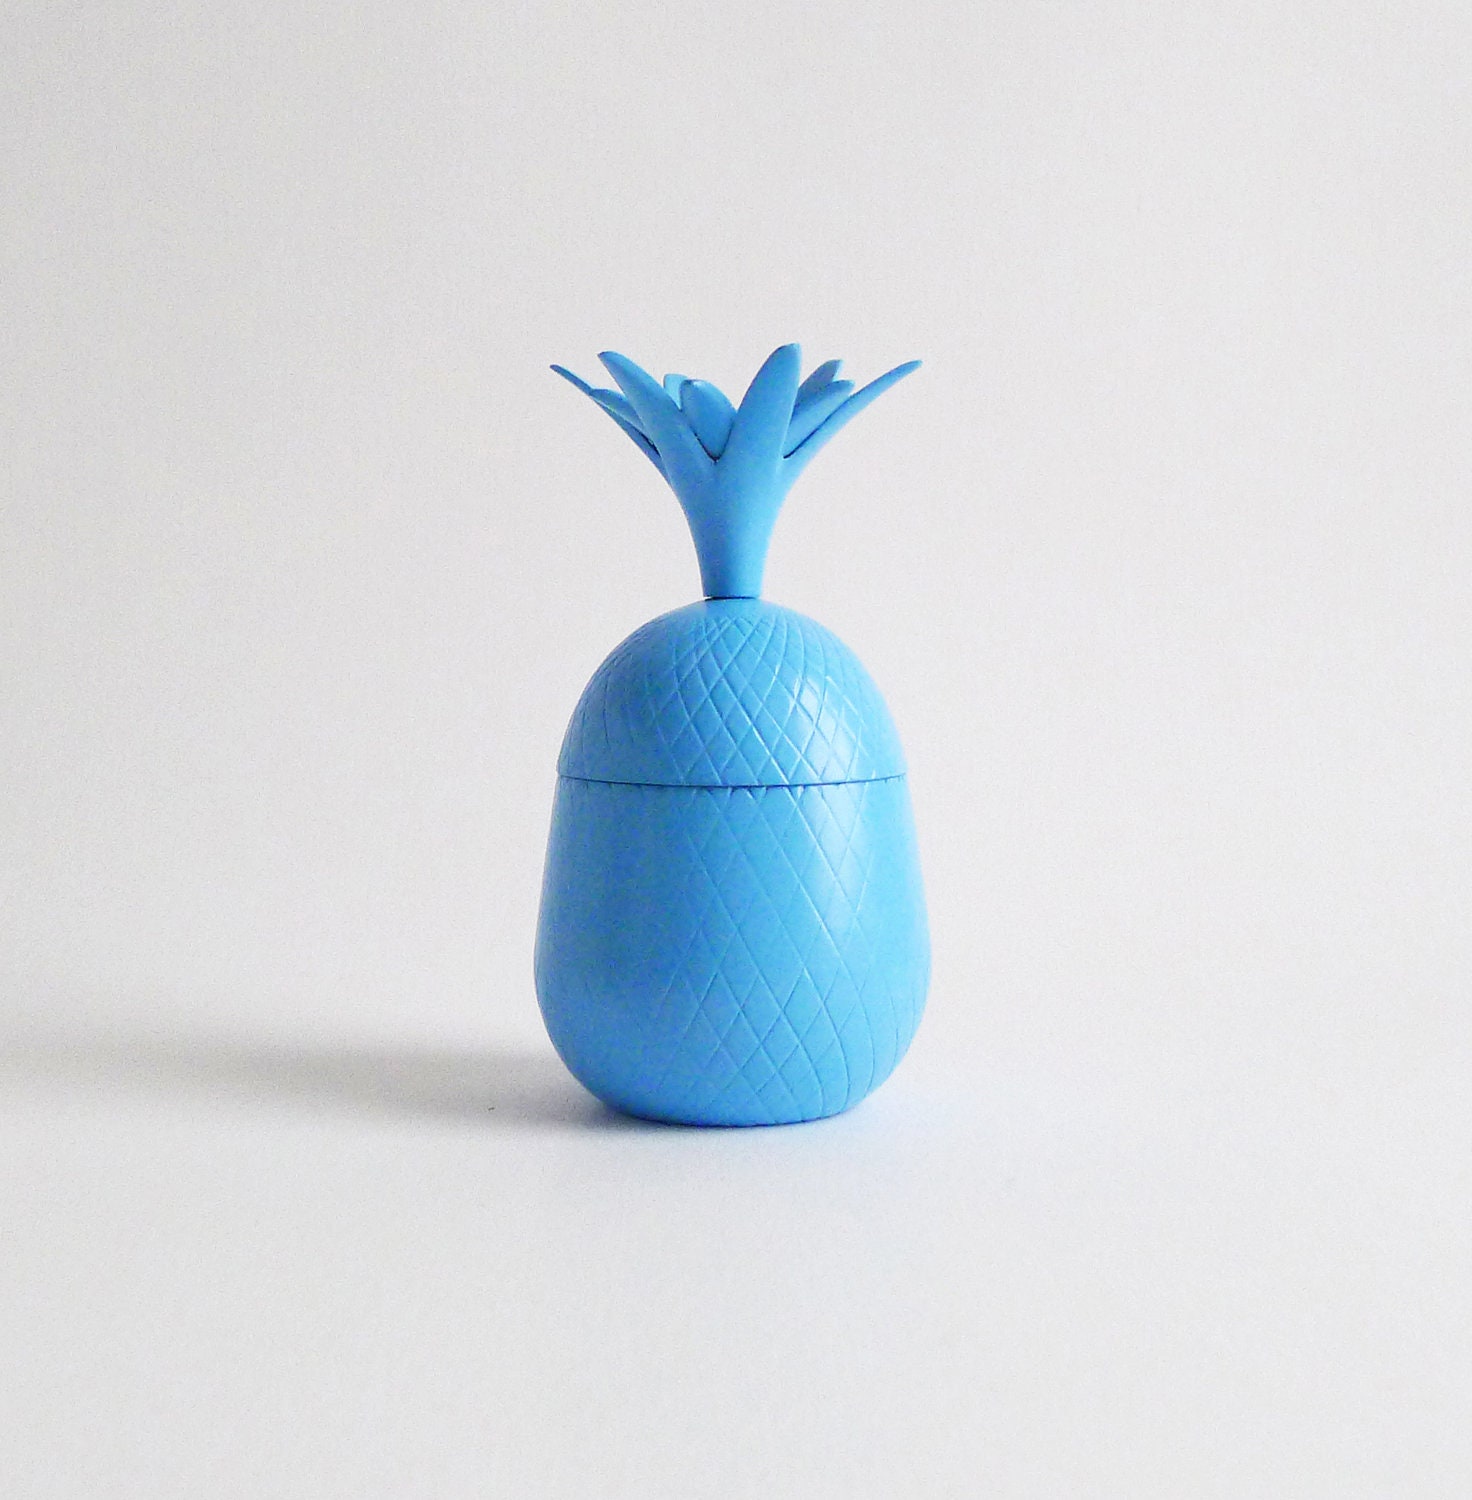 Vintage Brass Pineapple Customised with Bright Blue Paint by Trash Things - TrashThings